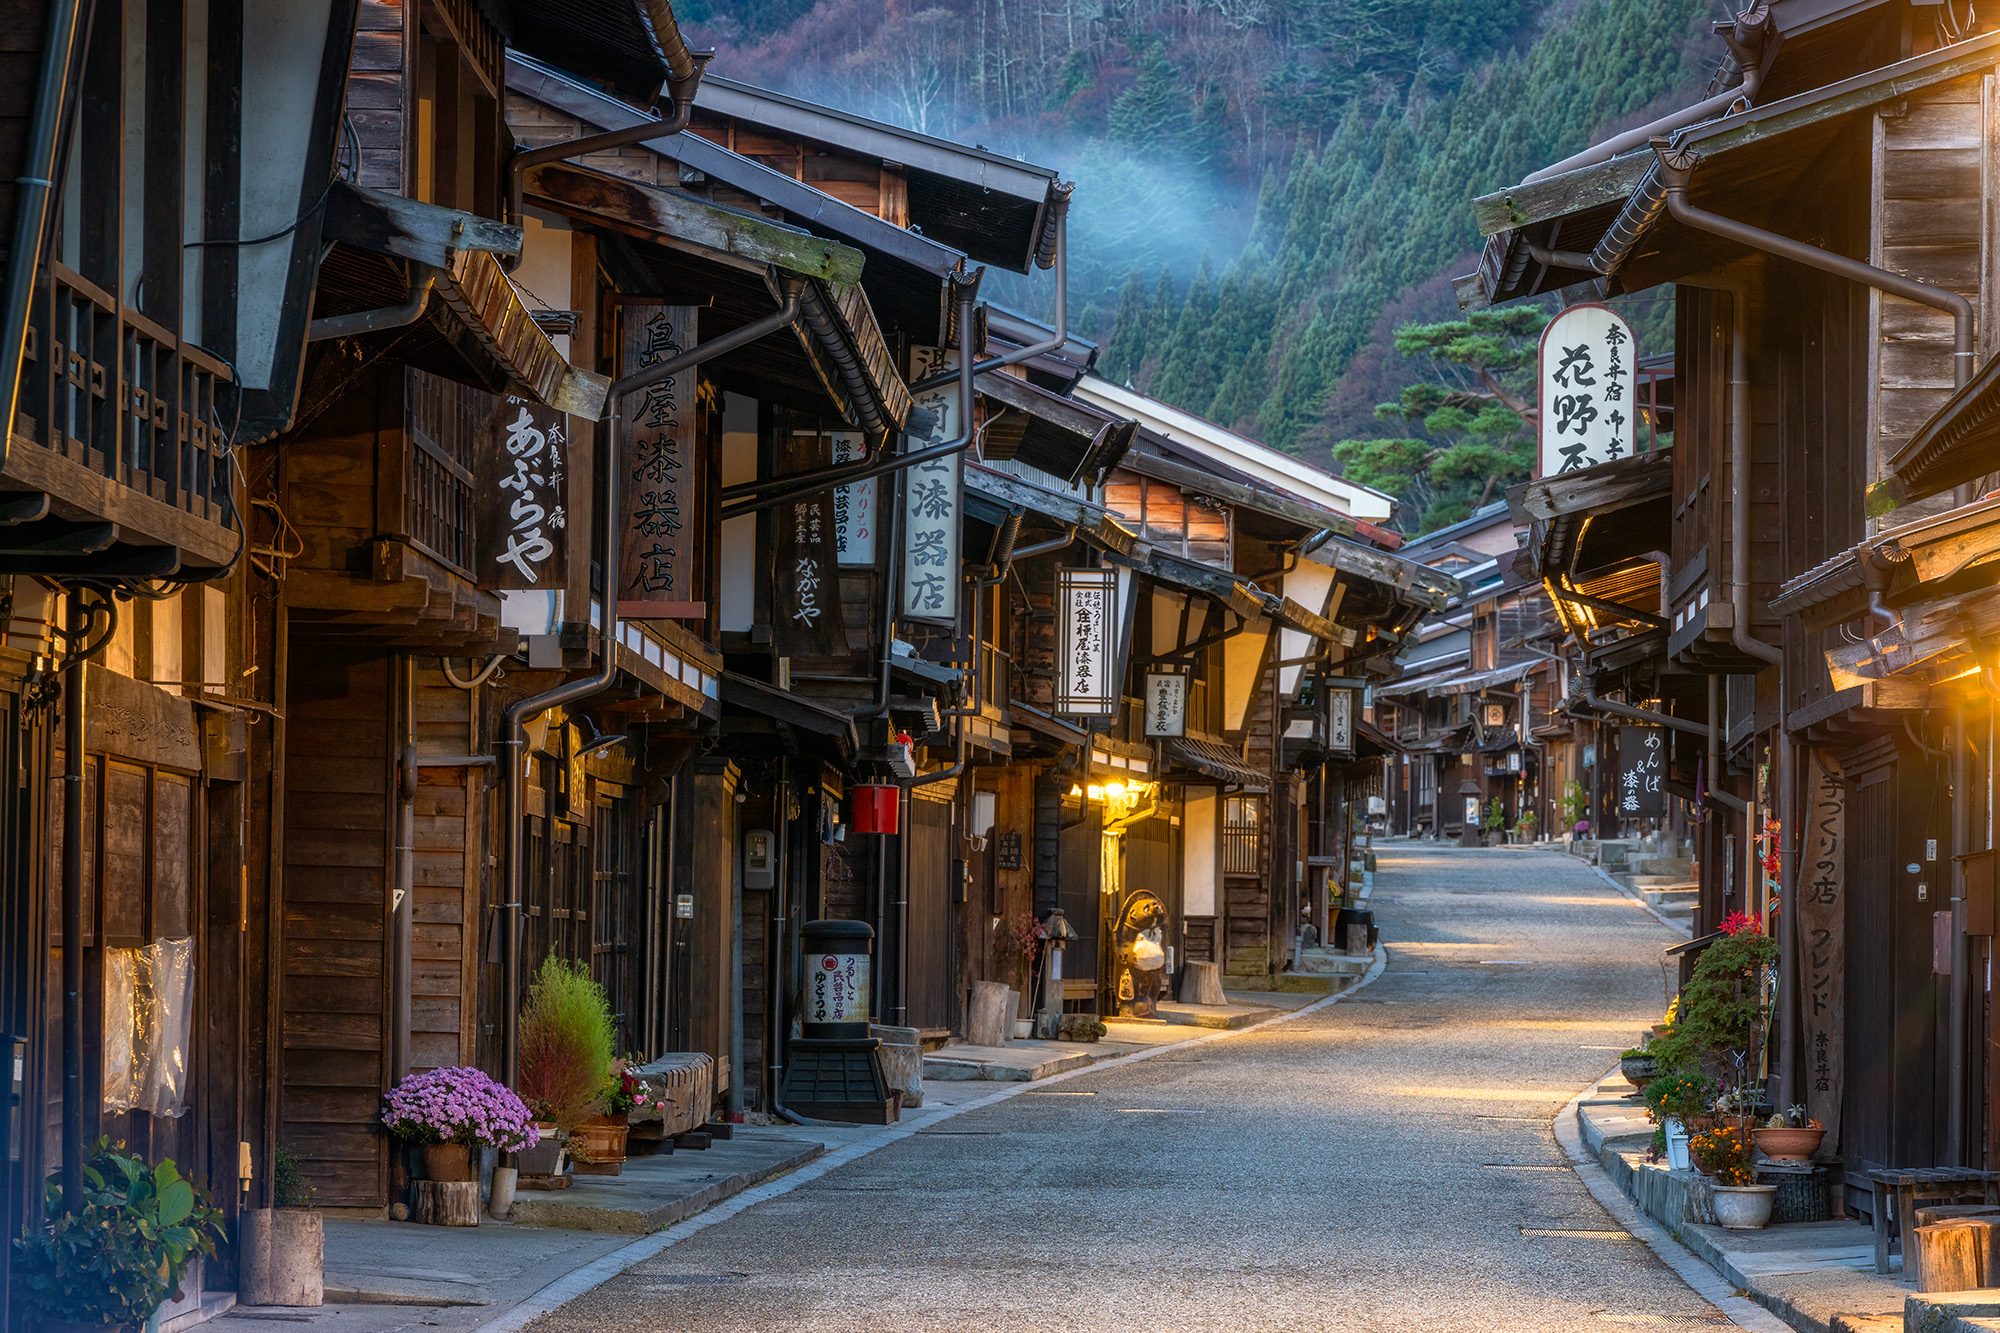 "Dawn in Edo's Embrace" captures the enchantment of Tsumago-juku, Japan, in the early pre-sunrise hours. The town exudes an Edo...